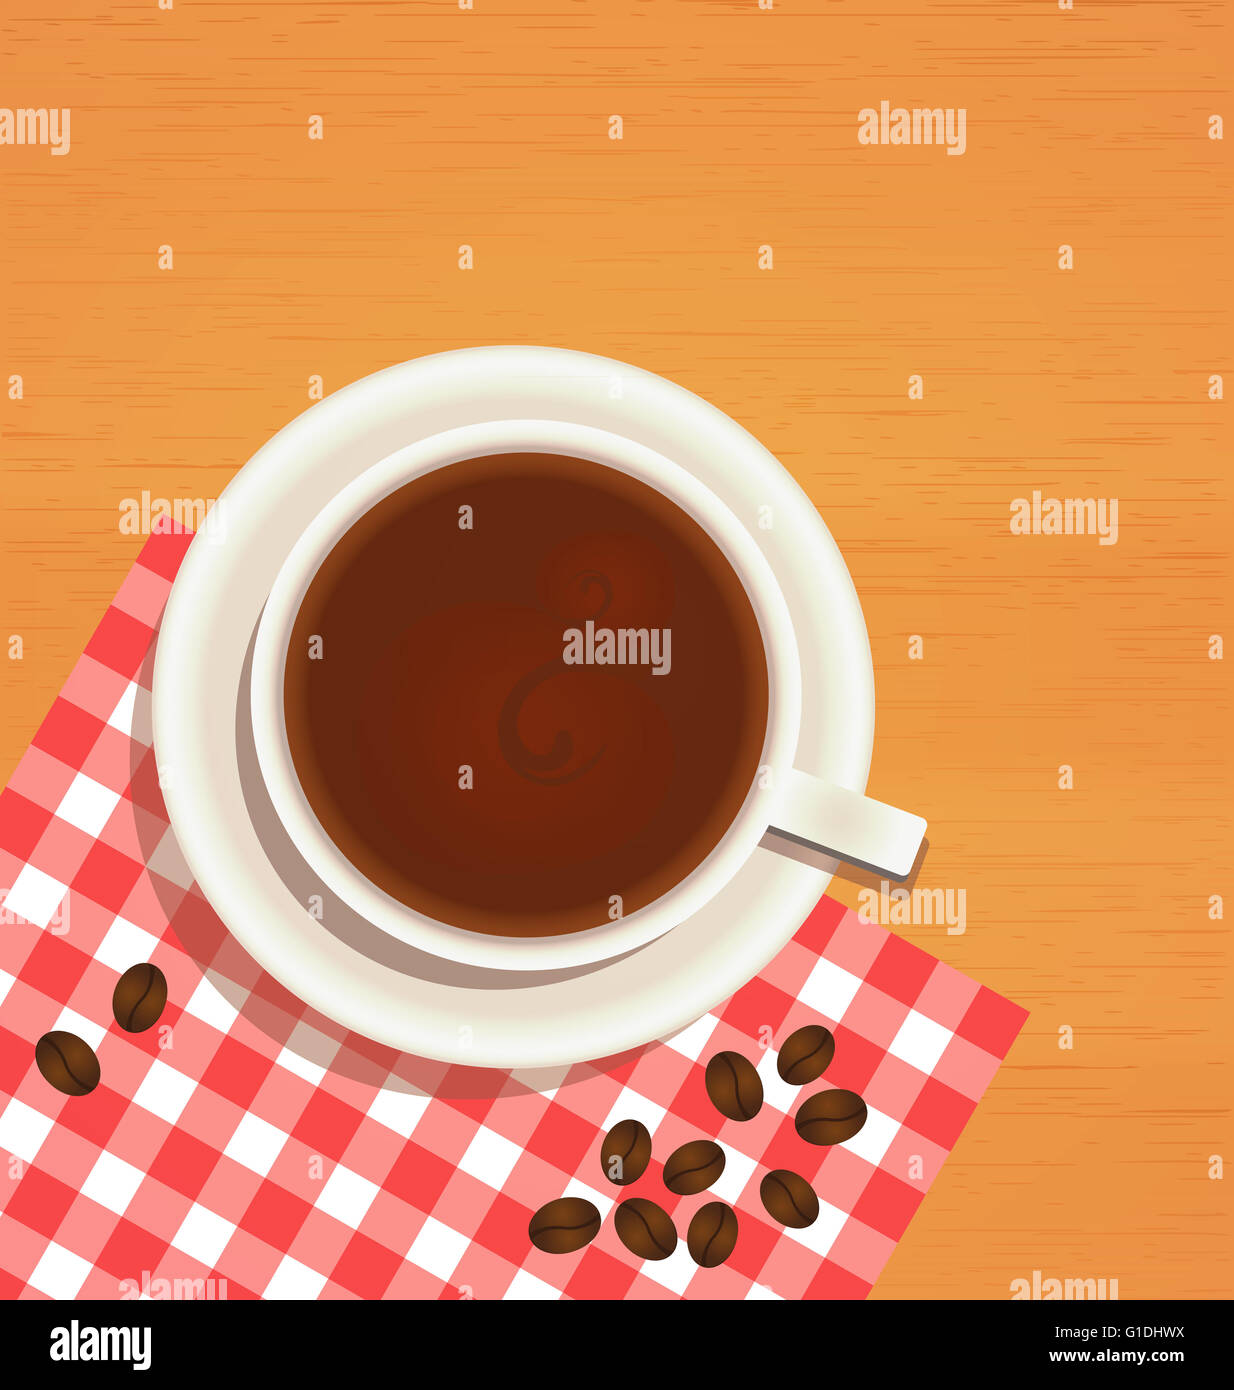 photography hi-res Alamy - Coffee morning images poster and stock